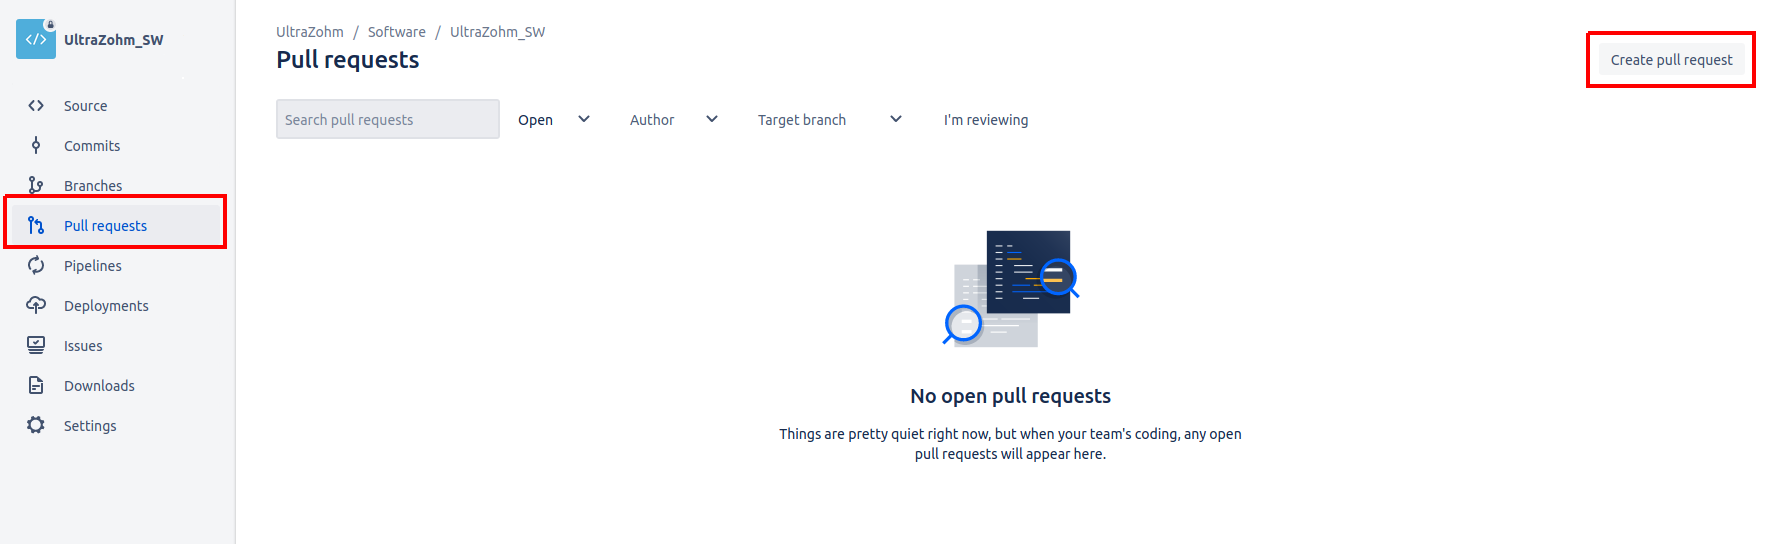 ../../../_images/create_pull_request.png